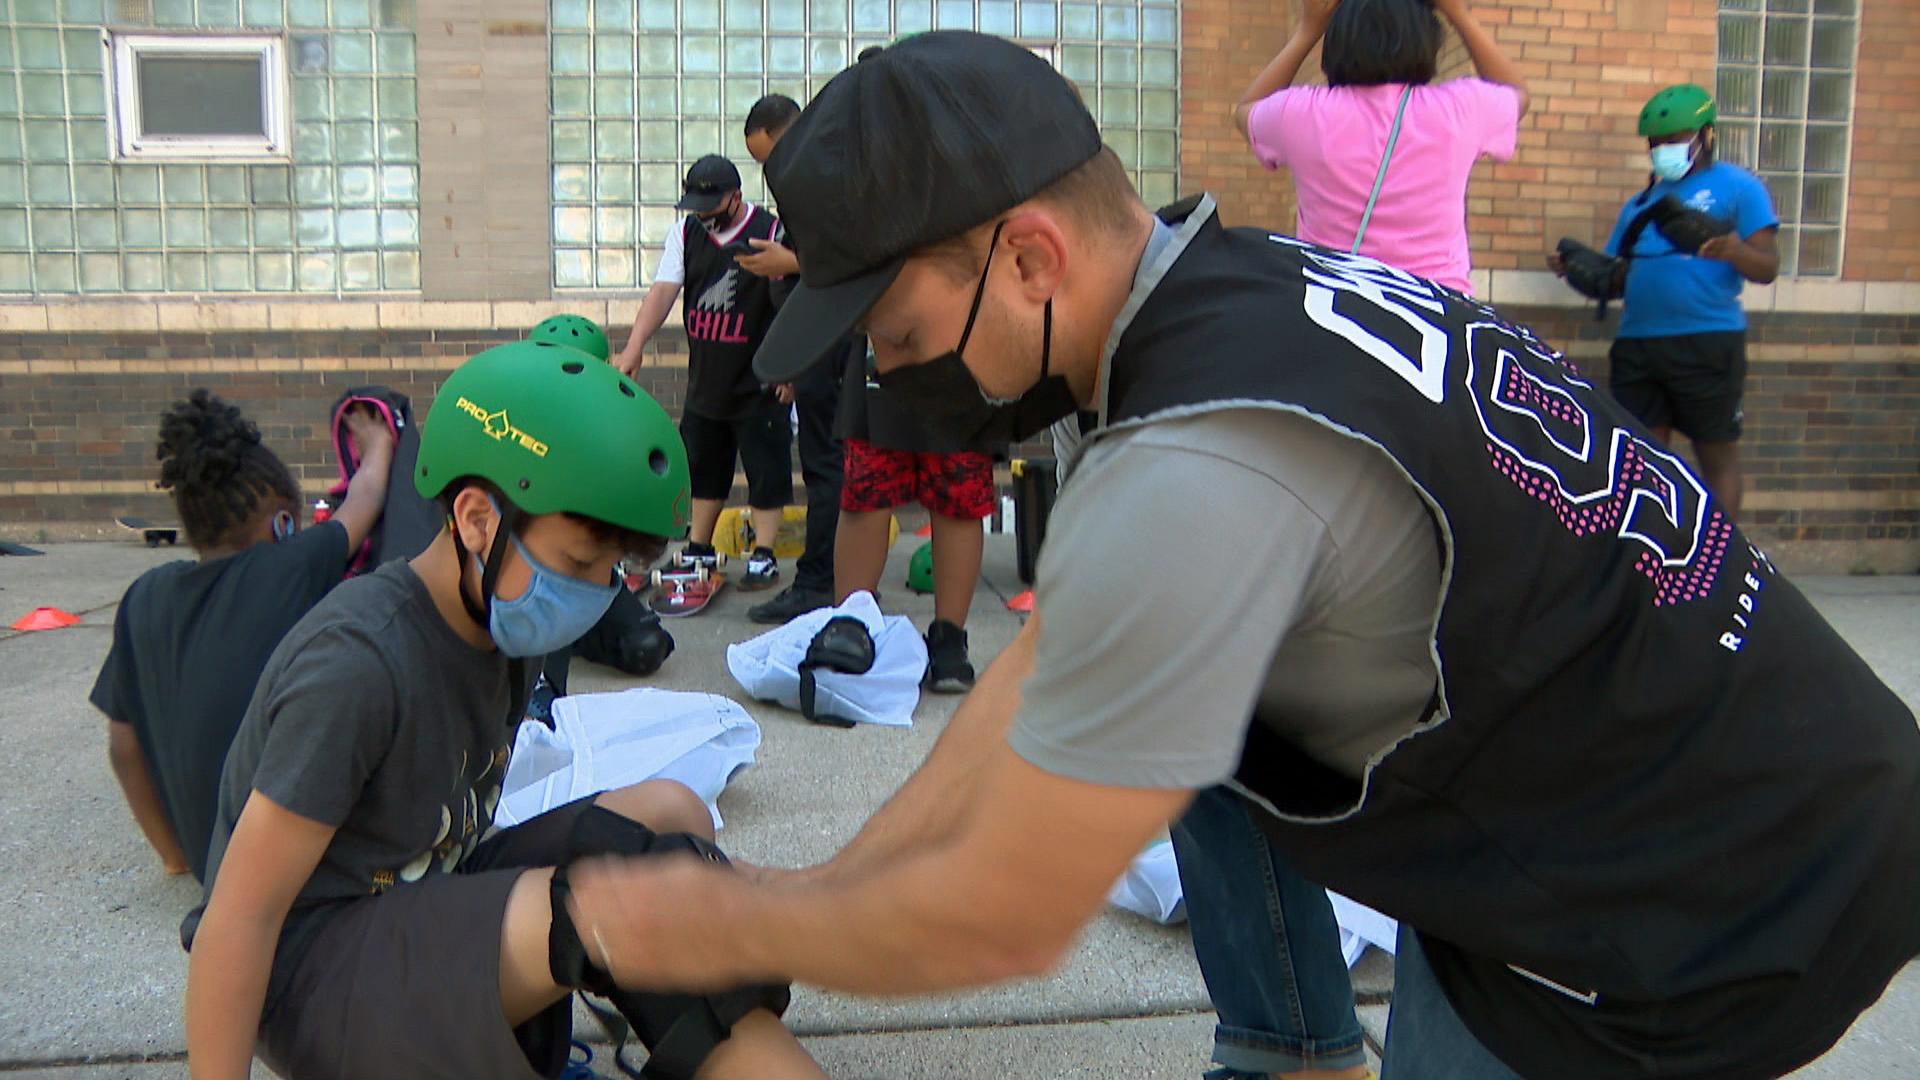 An instructor straps protective knee pads onto a participant of the Chill Foundation’s spring skateboard program at Louis L. Valentine Boys & Girls Club on May 26, 2021. (WTTW News)